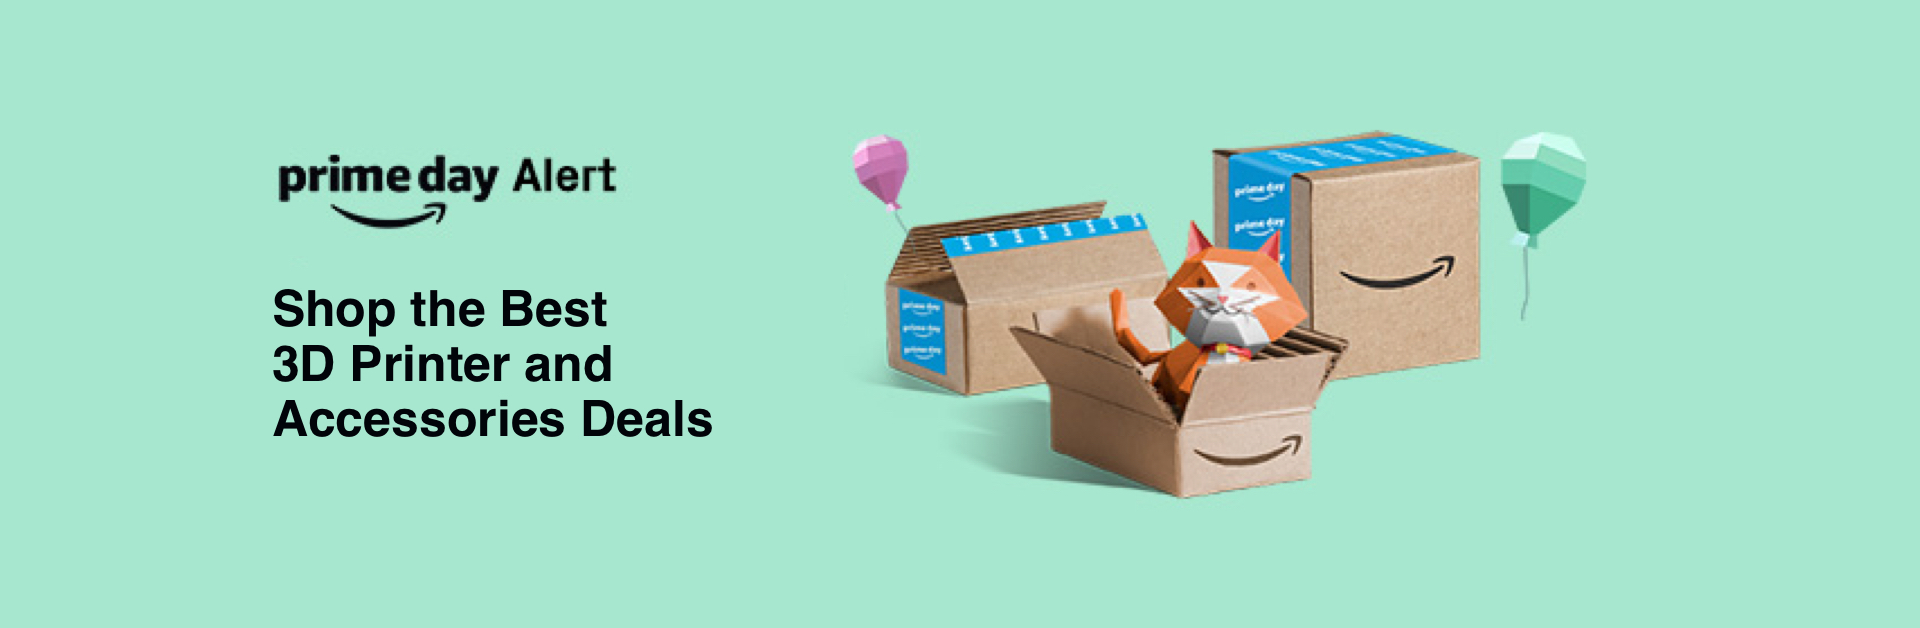 Best Prime Day deals 2019: 3D-Printers and Accessories